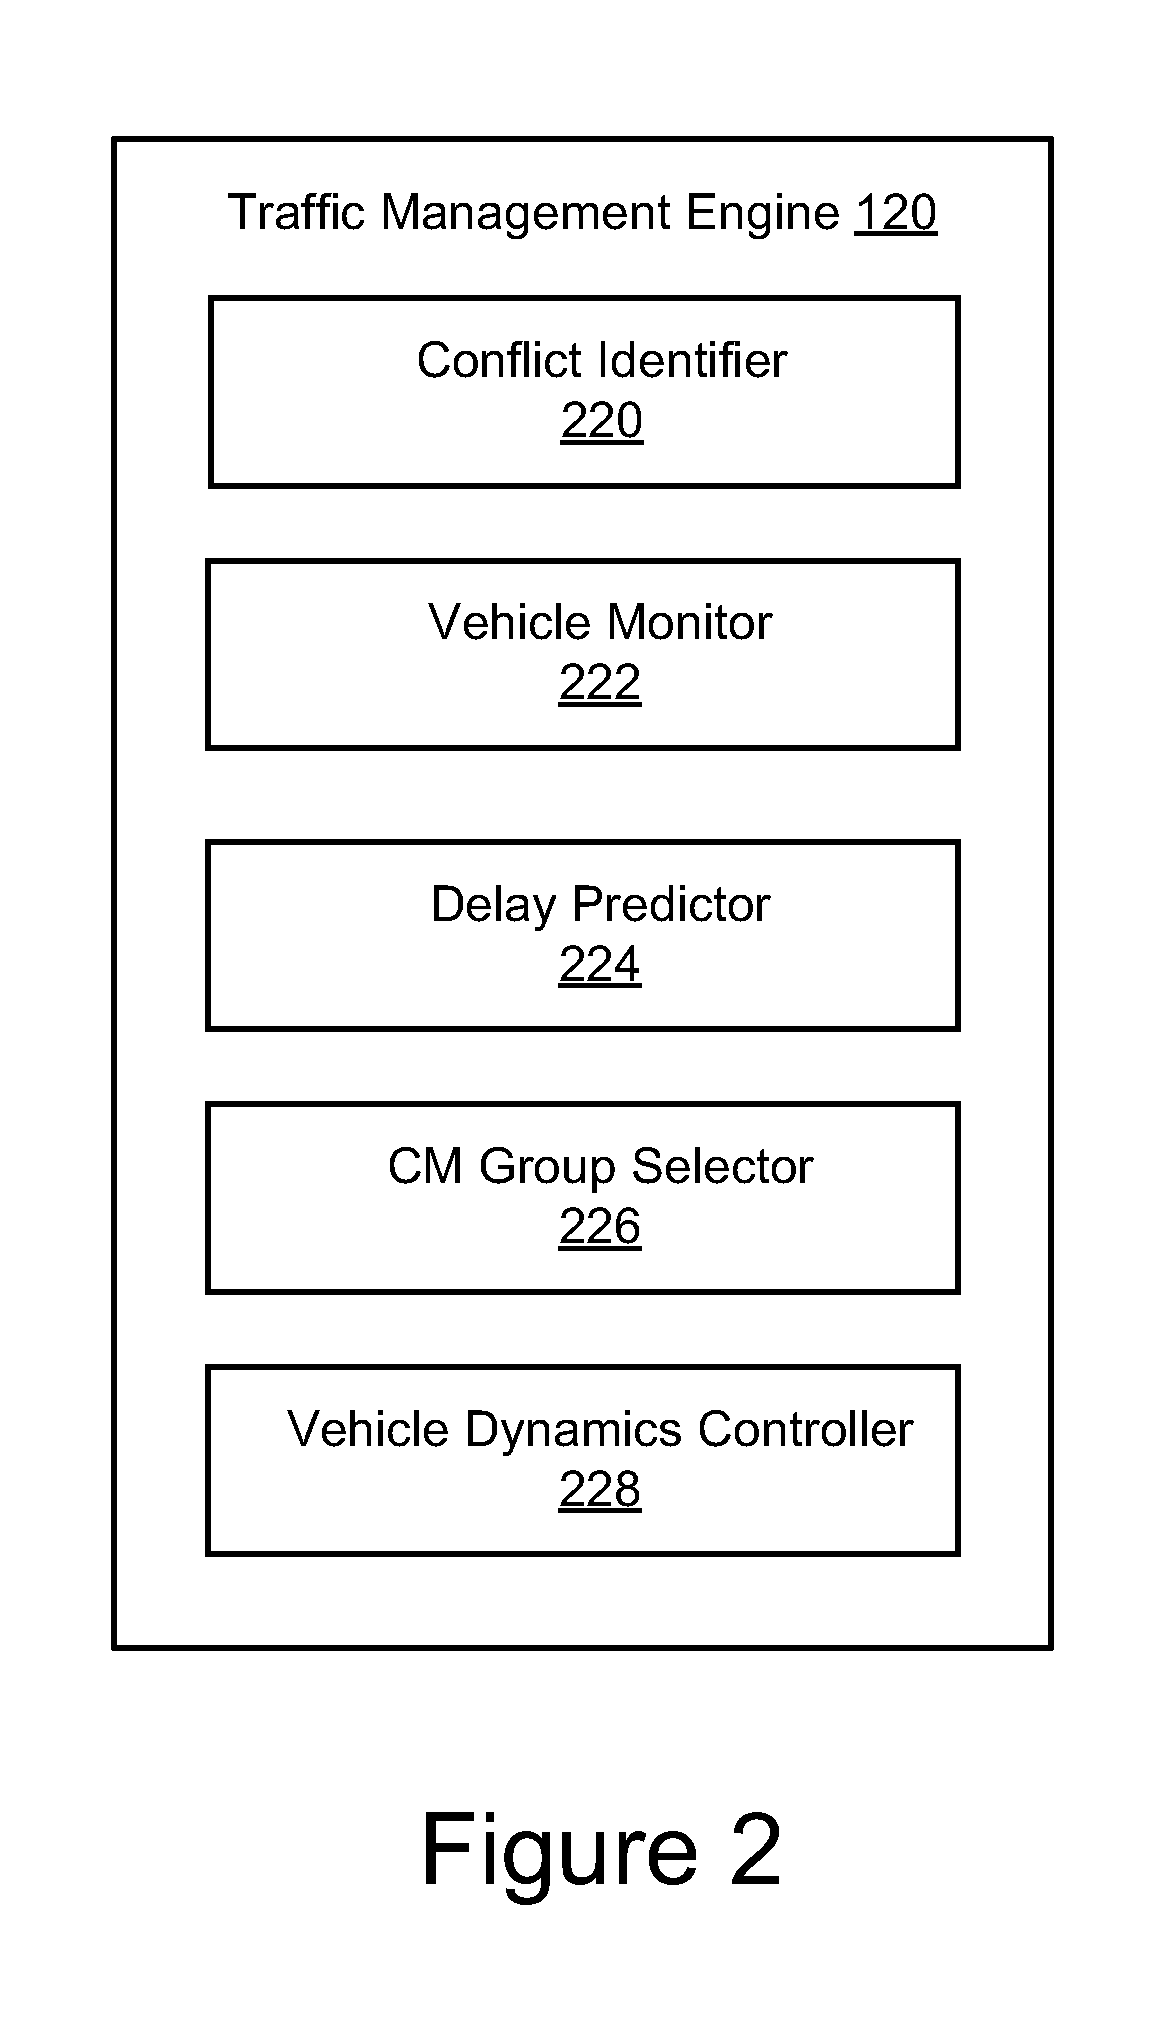 Remote Vehicle Control at Intersections